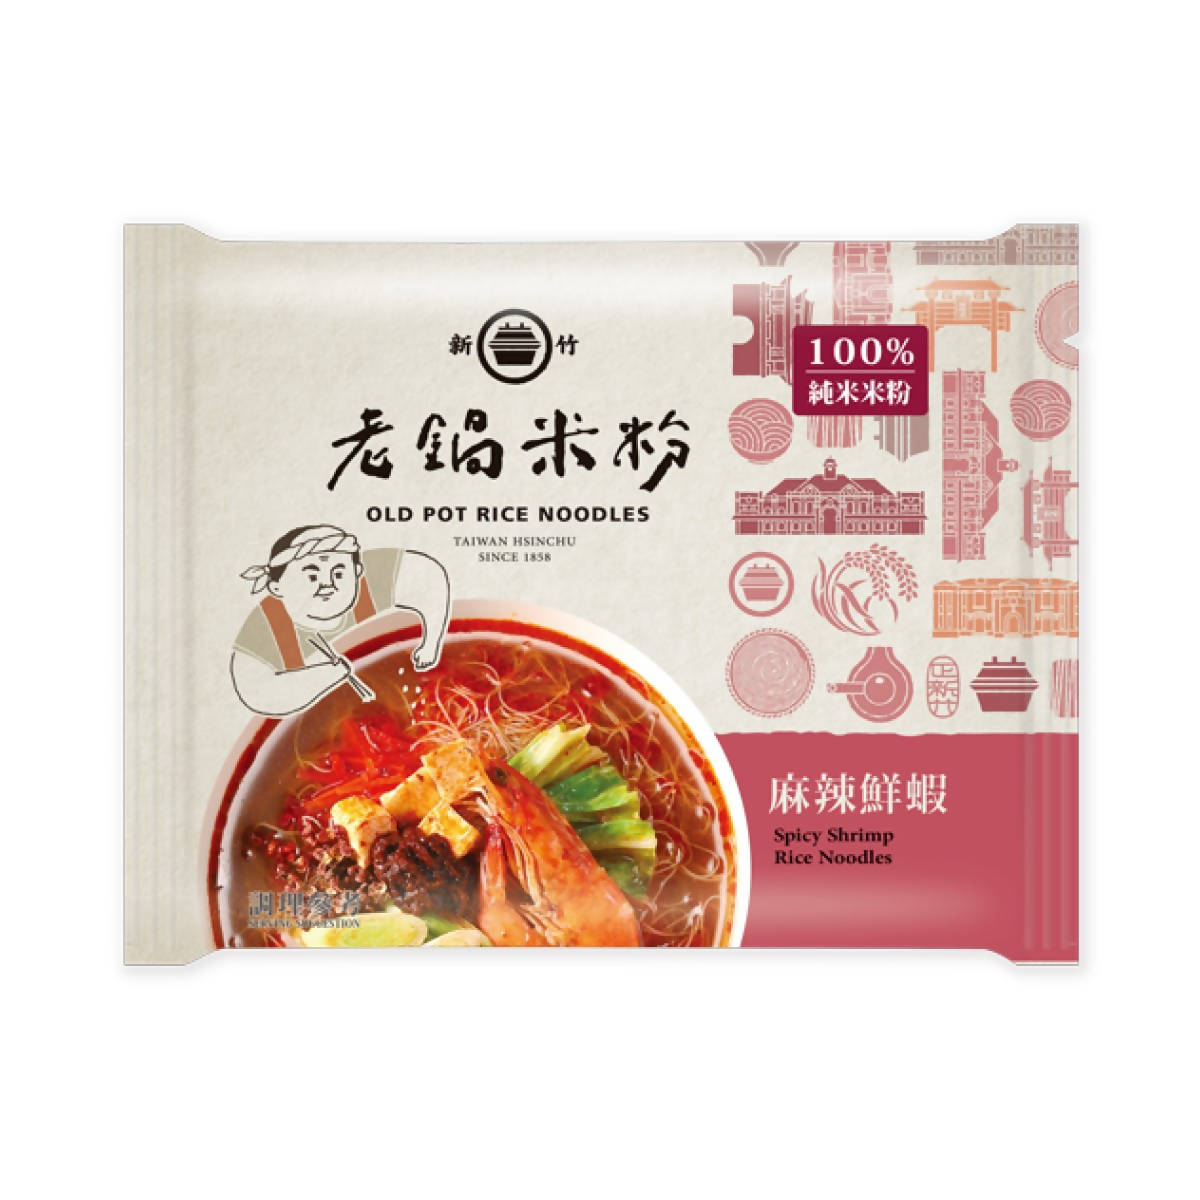 Taiwan Direct Mail【Old Pot Rice Noodles】 OLD POT RICE NOODLES Spicy Shrimp Flavor Rice Noodles 60g (Single Pack)(Expiration Date:2022/10/22) 